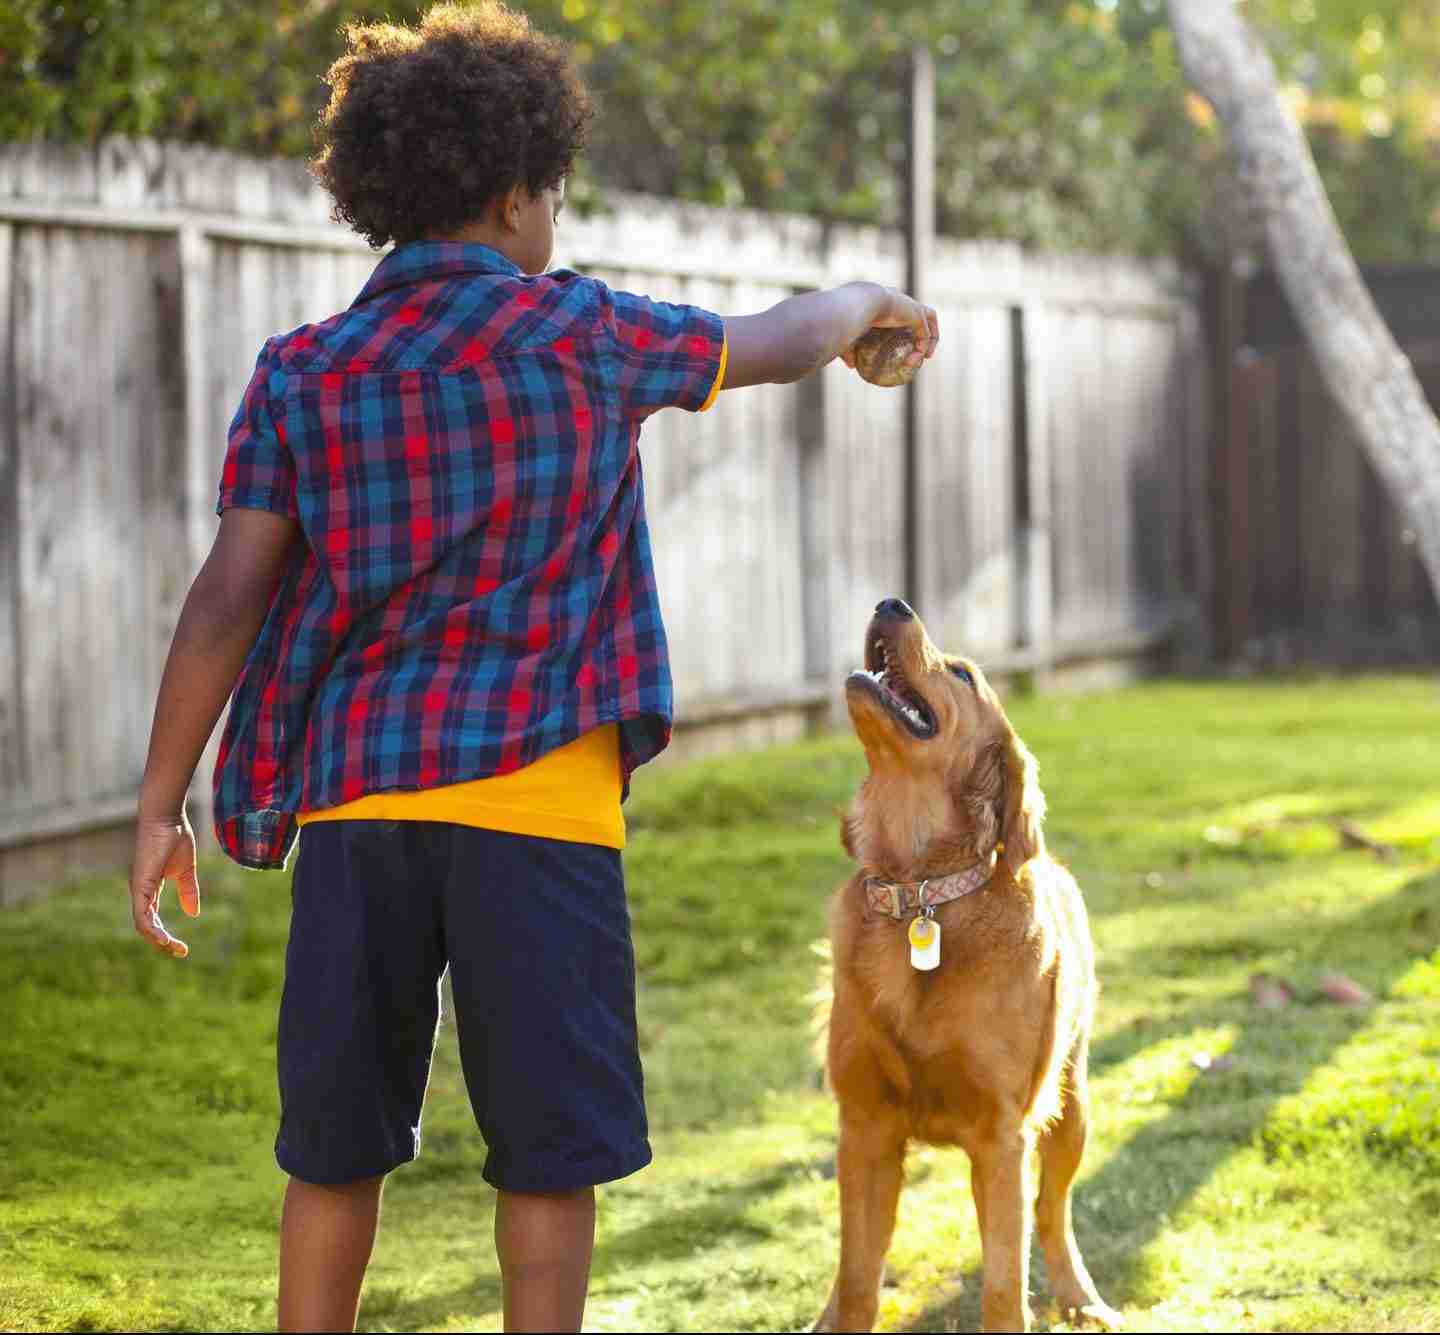 Boy holding up ball for his dog in back garden